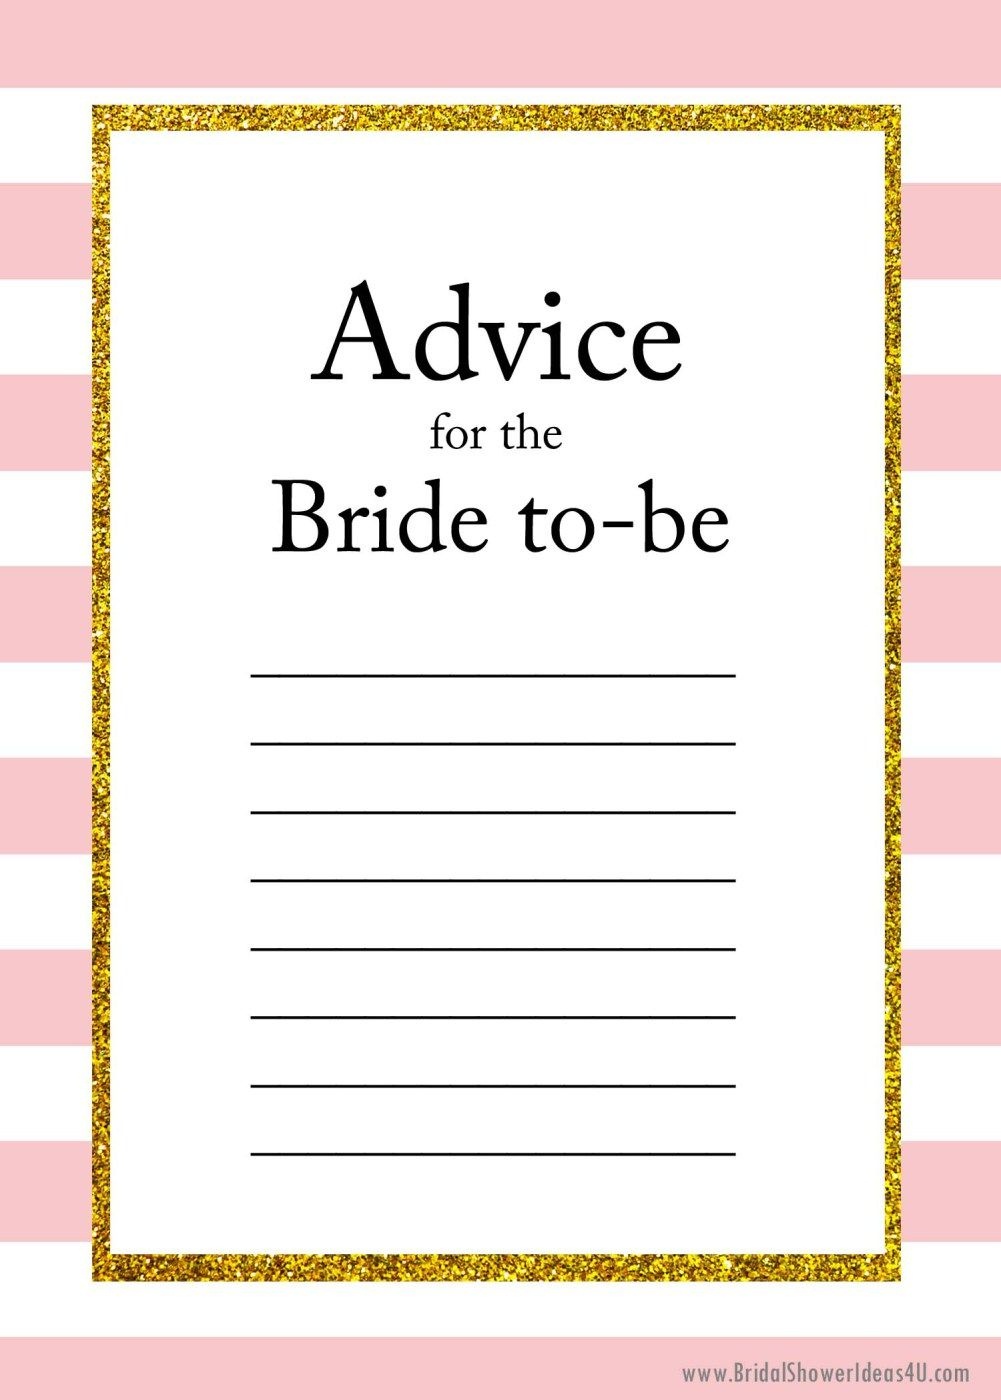 Free Printable Advice For The Bride To Be Cards | Friendship | Bride - Free Printable Bridal Shower Cards